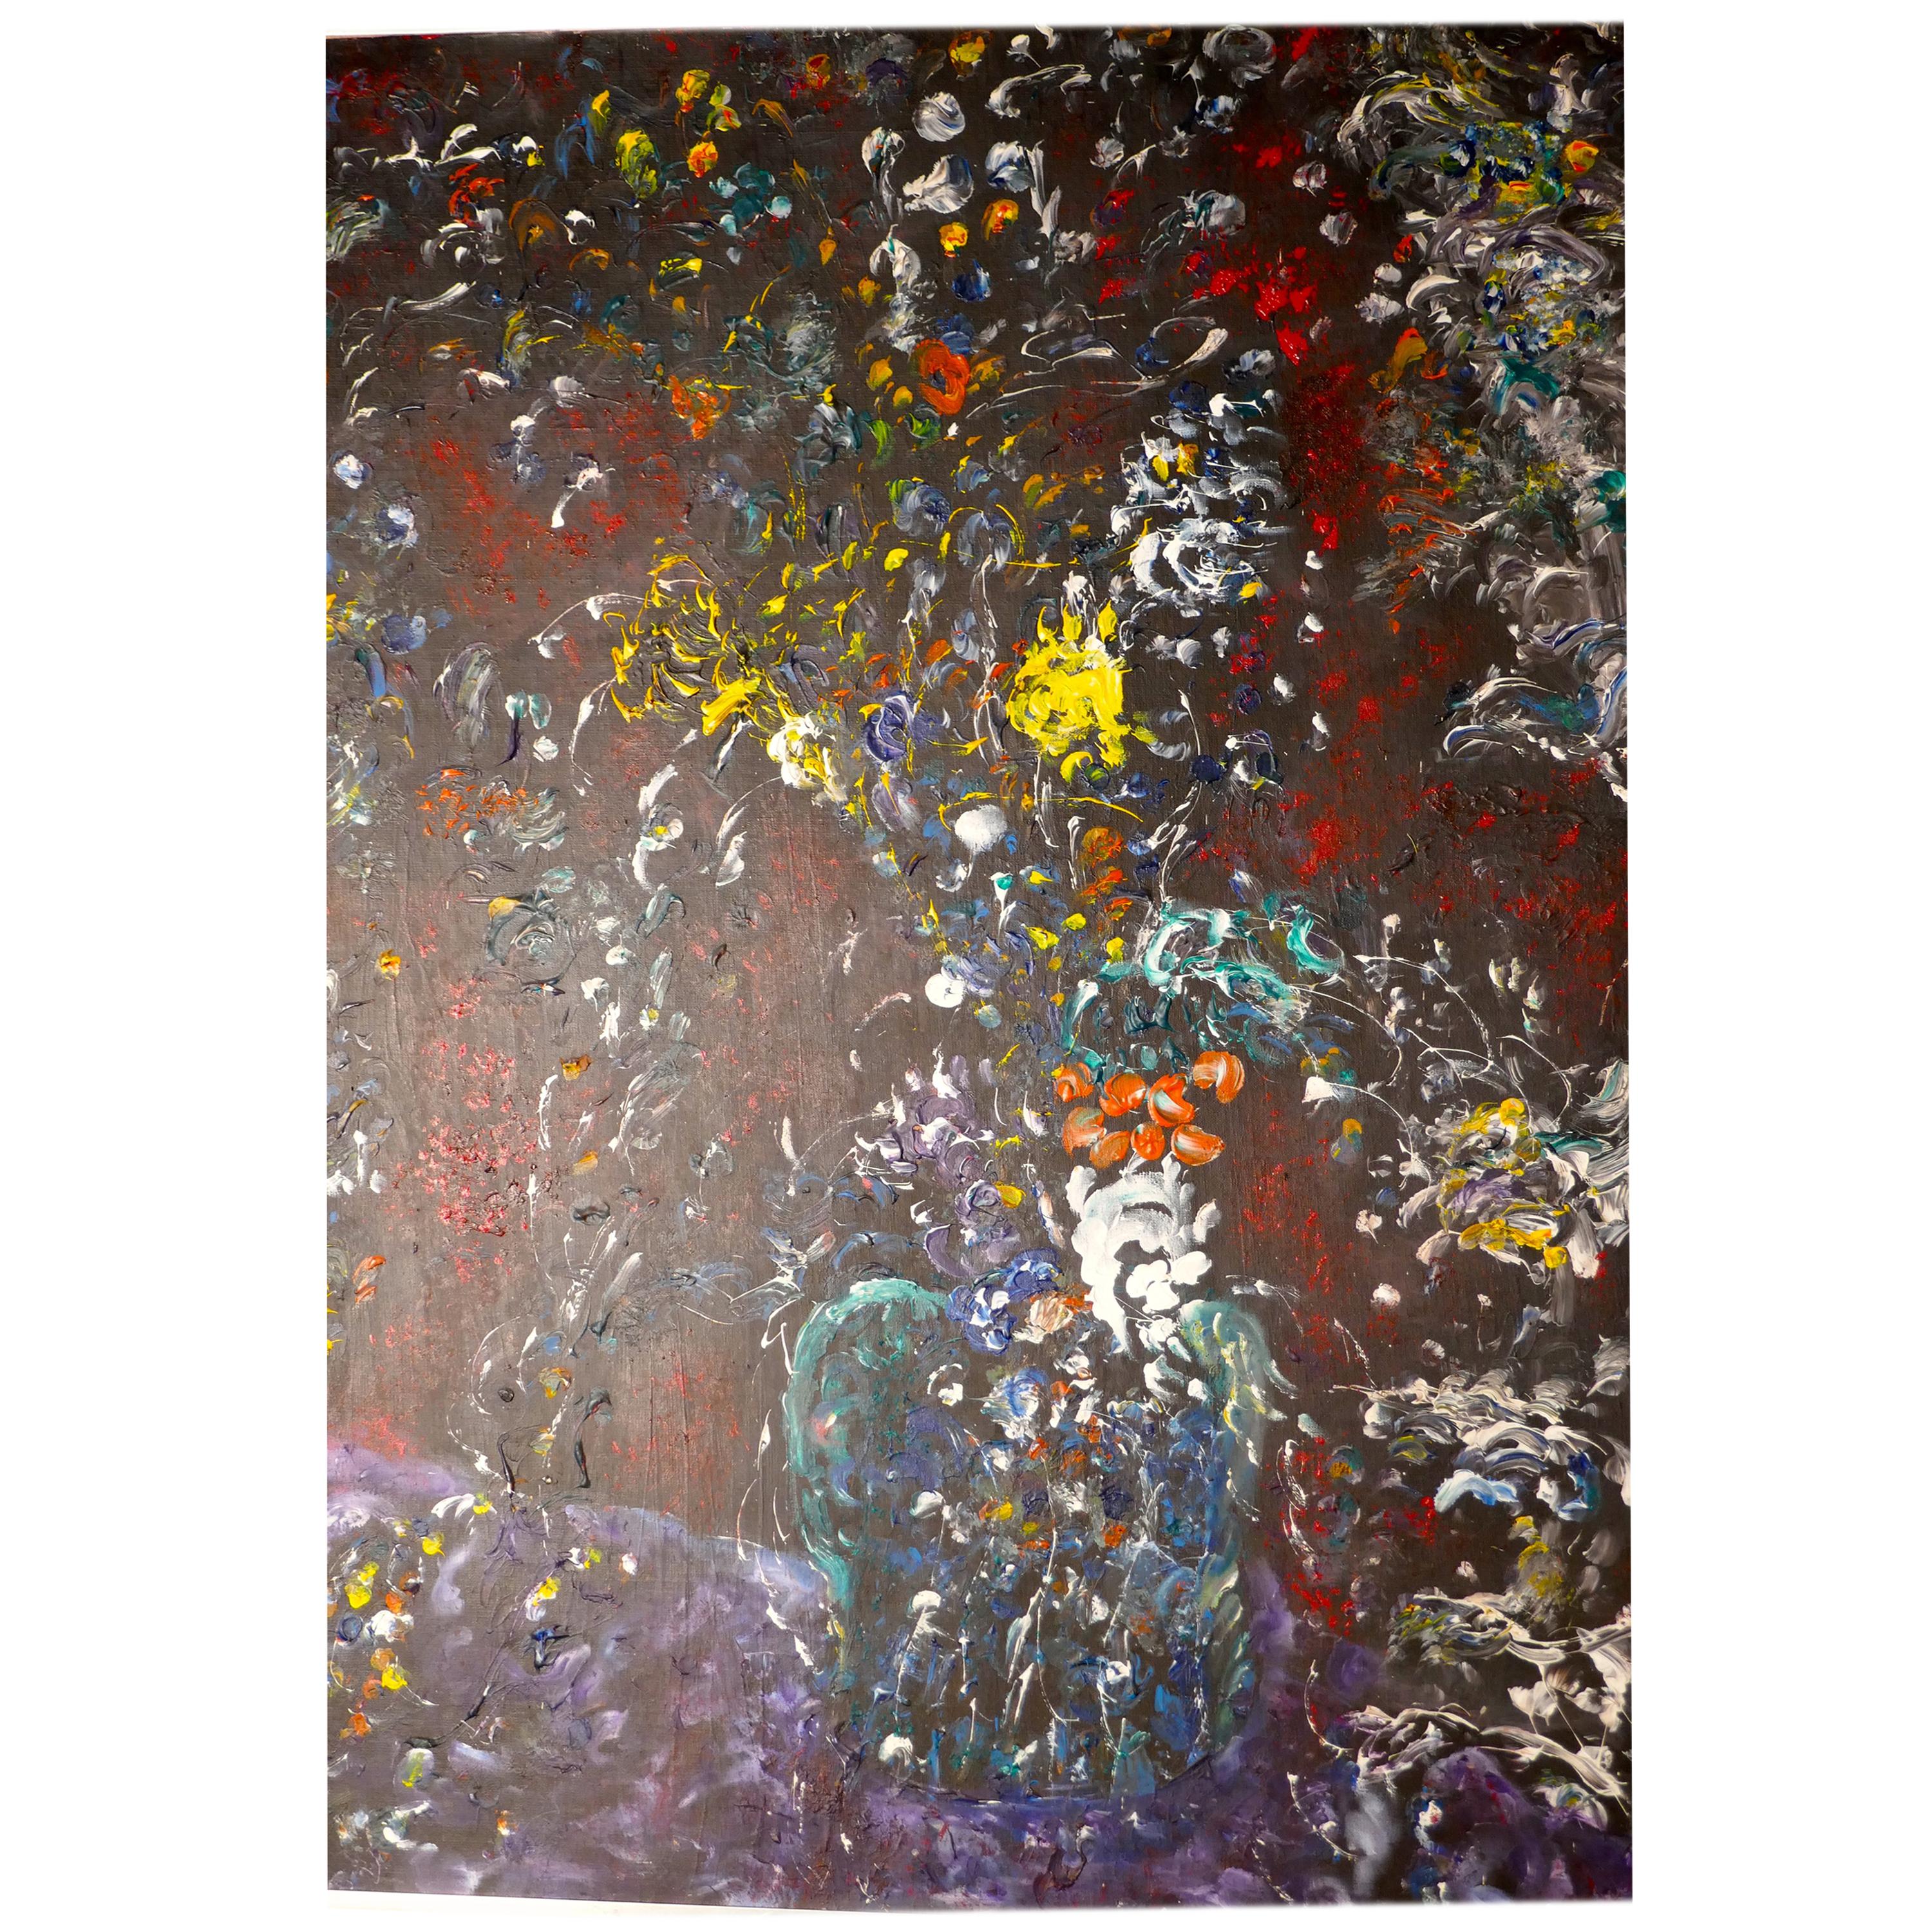 1960s-1970s Large Abstract Oil Painting “A splash of Colour” by Stanley Churchus